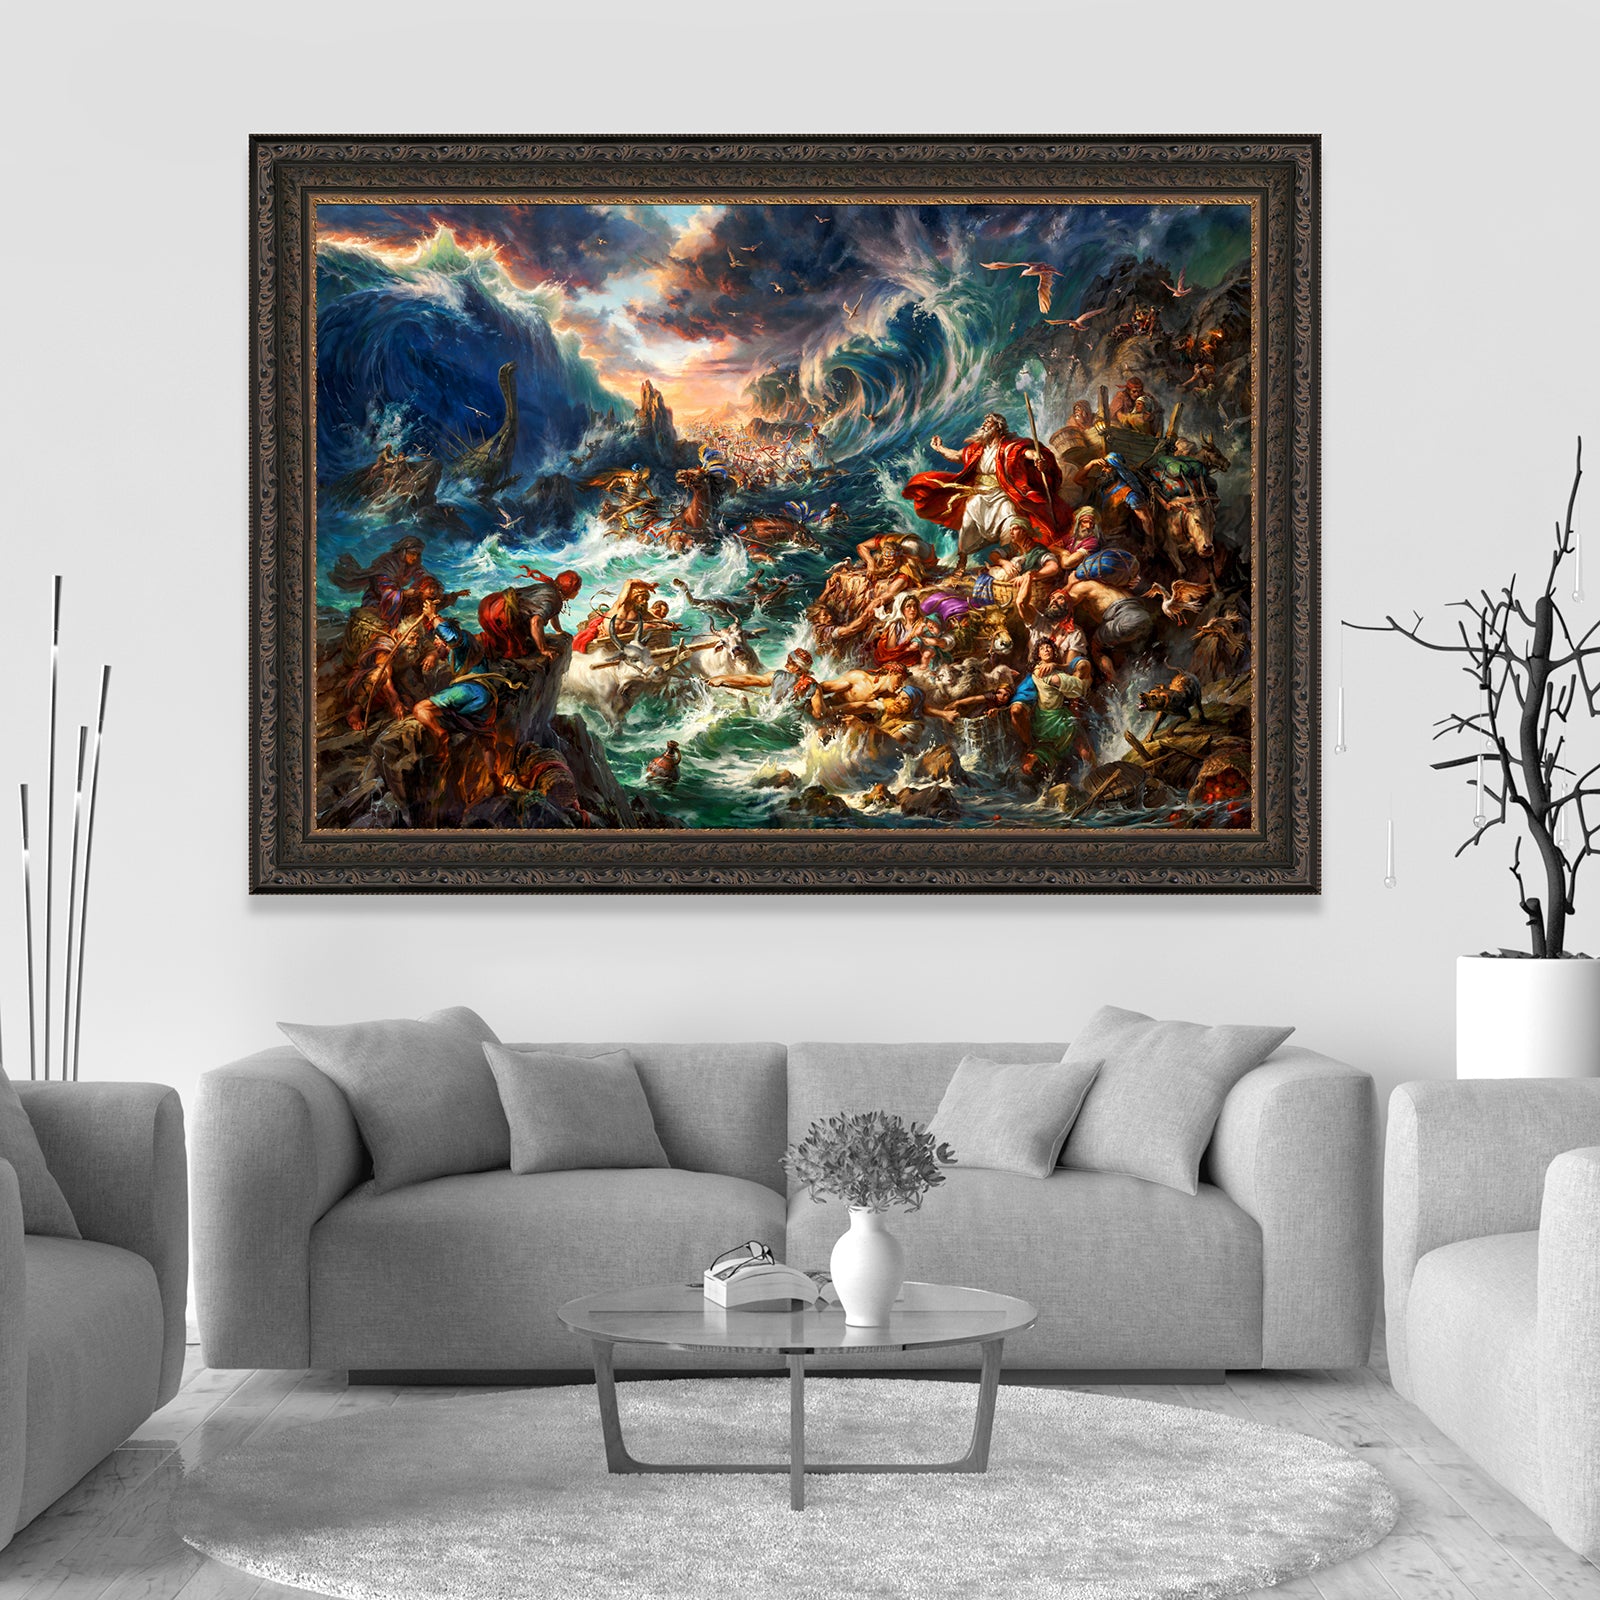 collection of original oil paintings with frame options showcase renaissance revival images paintings and art pieces in a room setting - Blend Cota original oil painting - renaissance revival - blend cota studios art